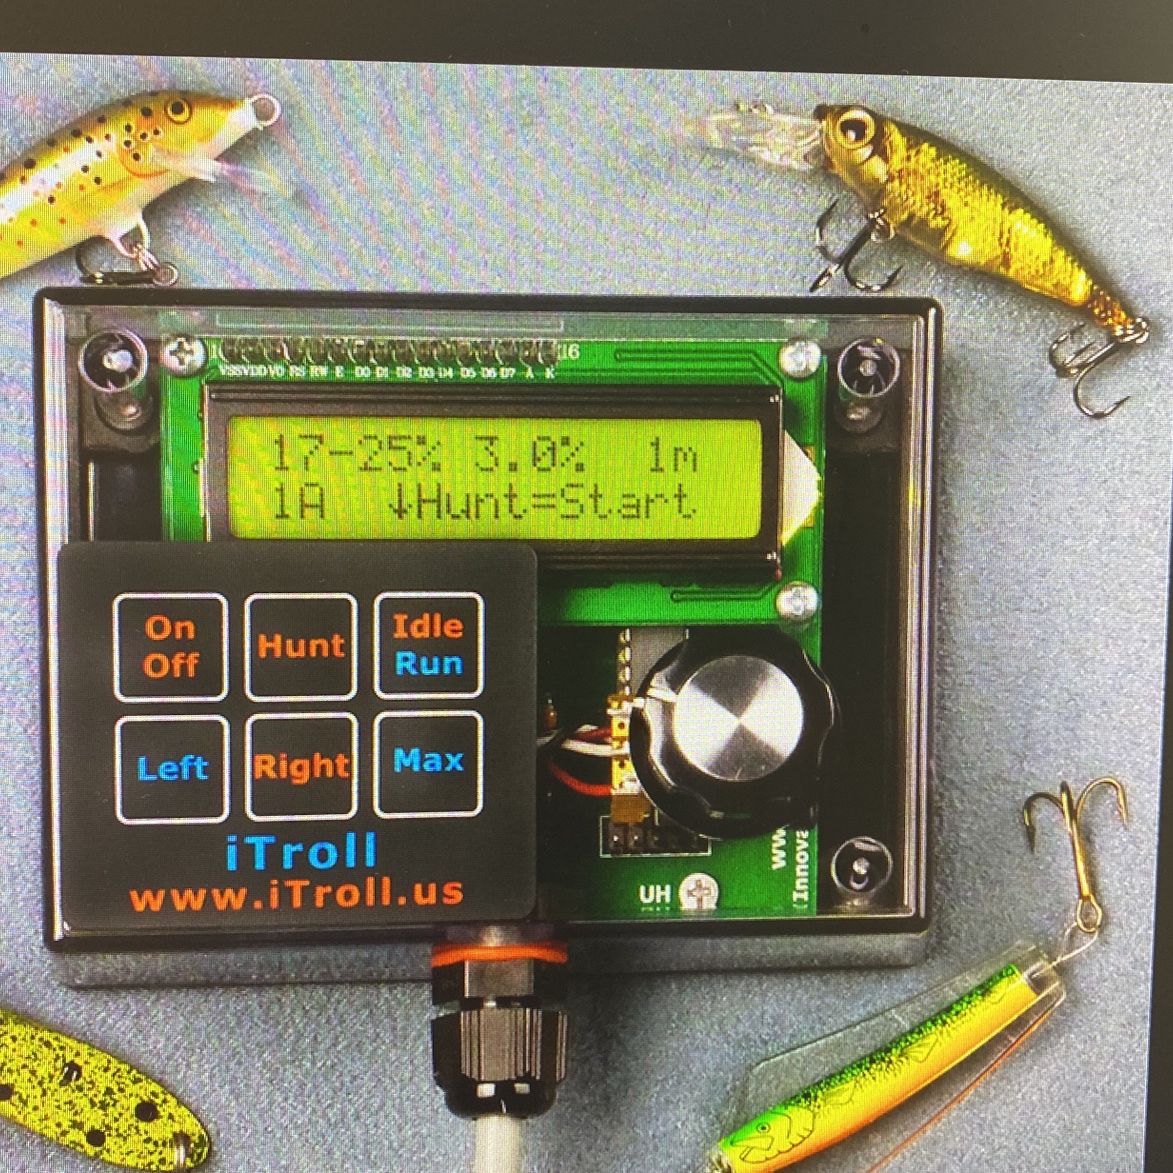 I Troll Kicker Throttle Controller For Outboards